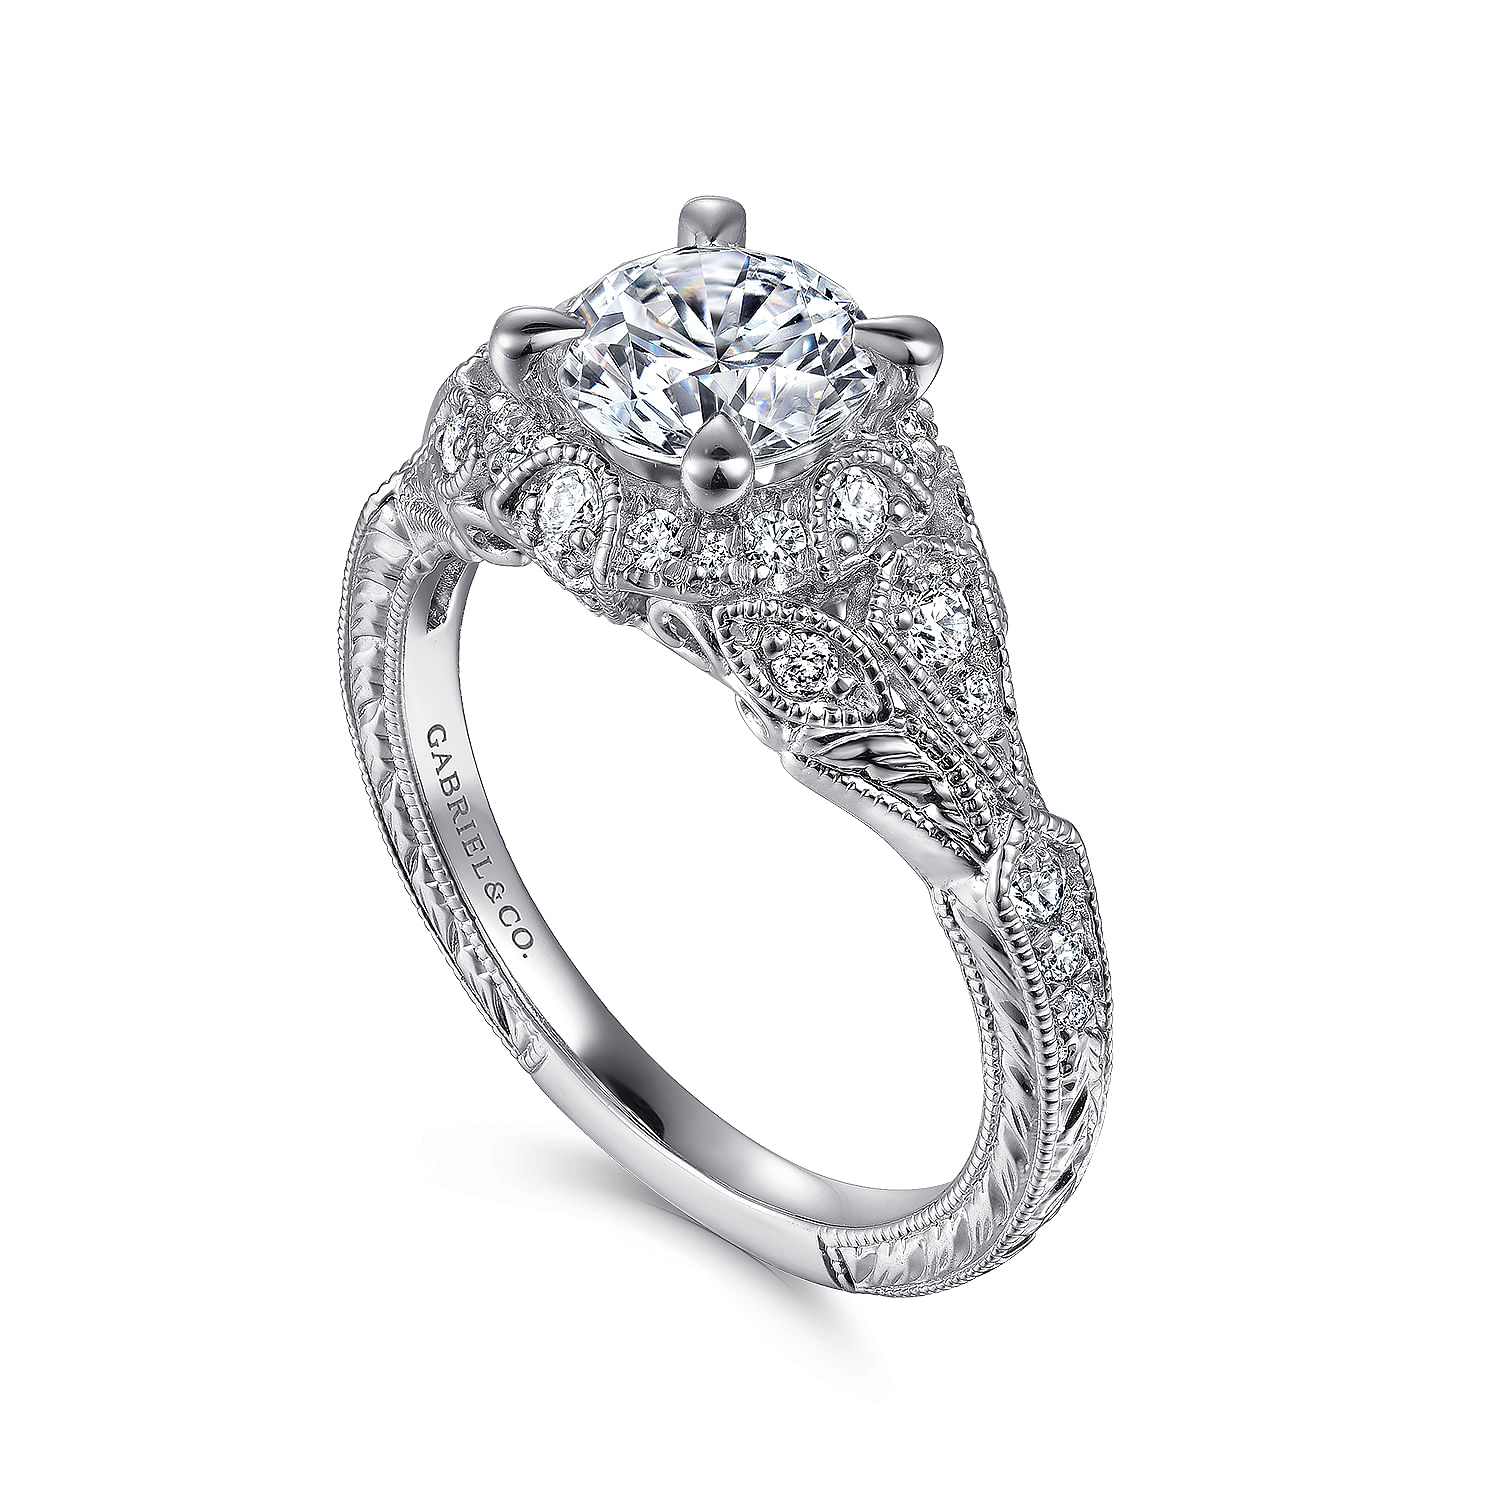 Annadale - Unique 14K White Gold Vintage Inspired Diamond Halo Engagement Ring - 0.35 ct - Shot 3